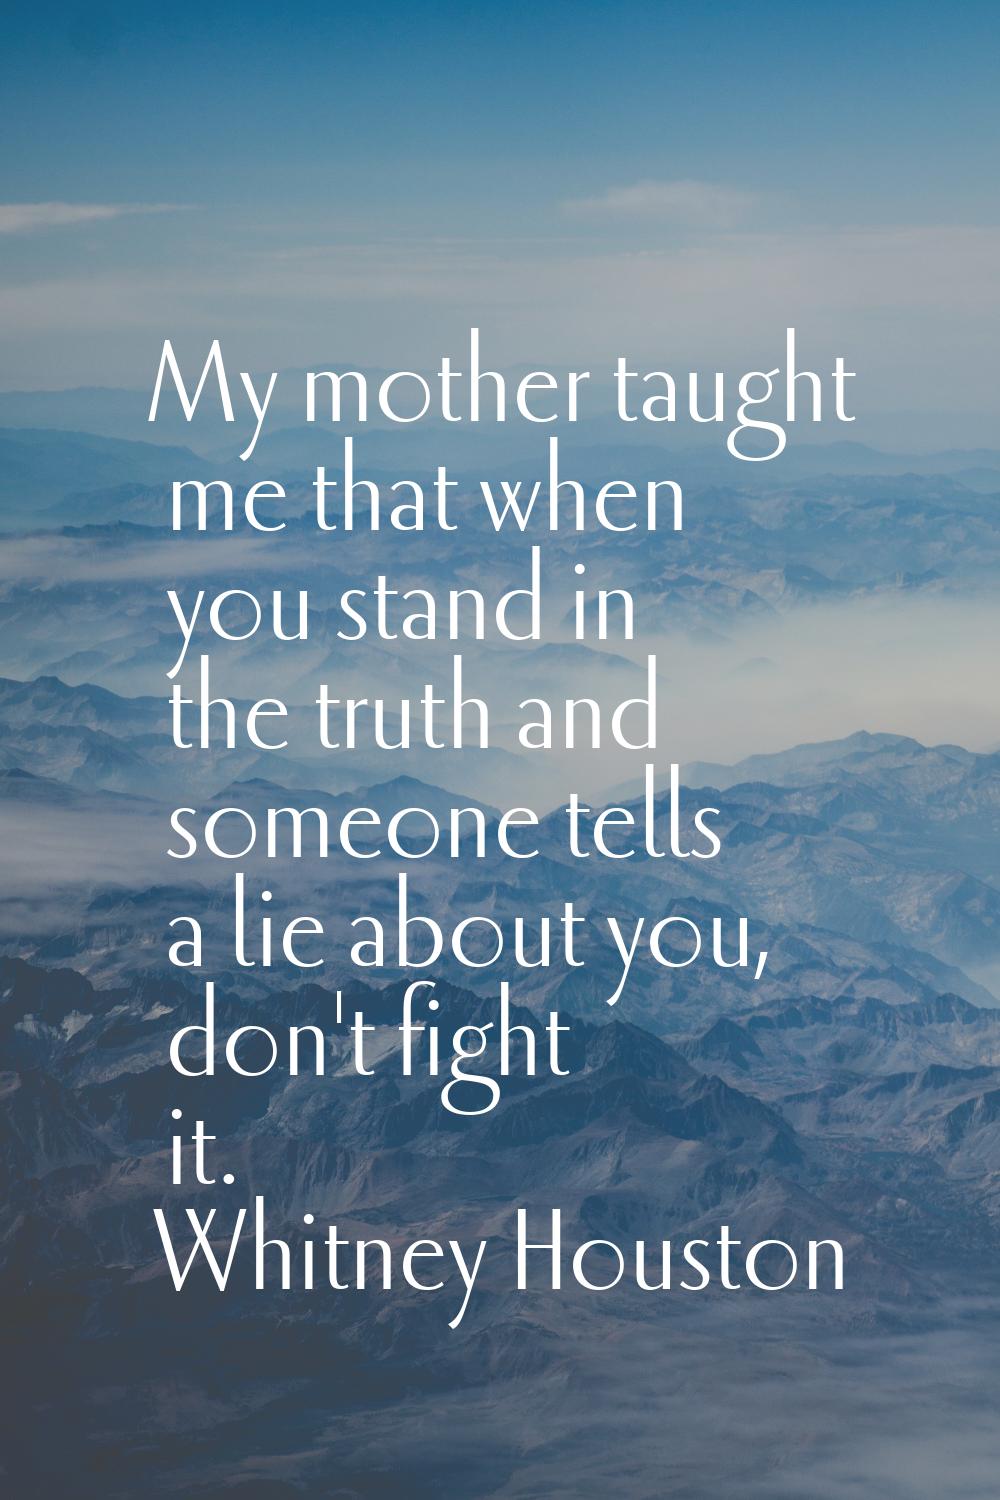 My mother taught me that when you stand in the truth and someone tells a lie about you, don't fight